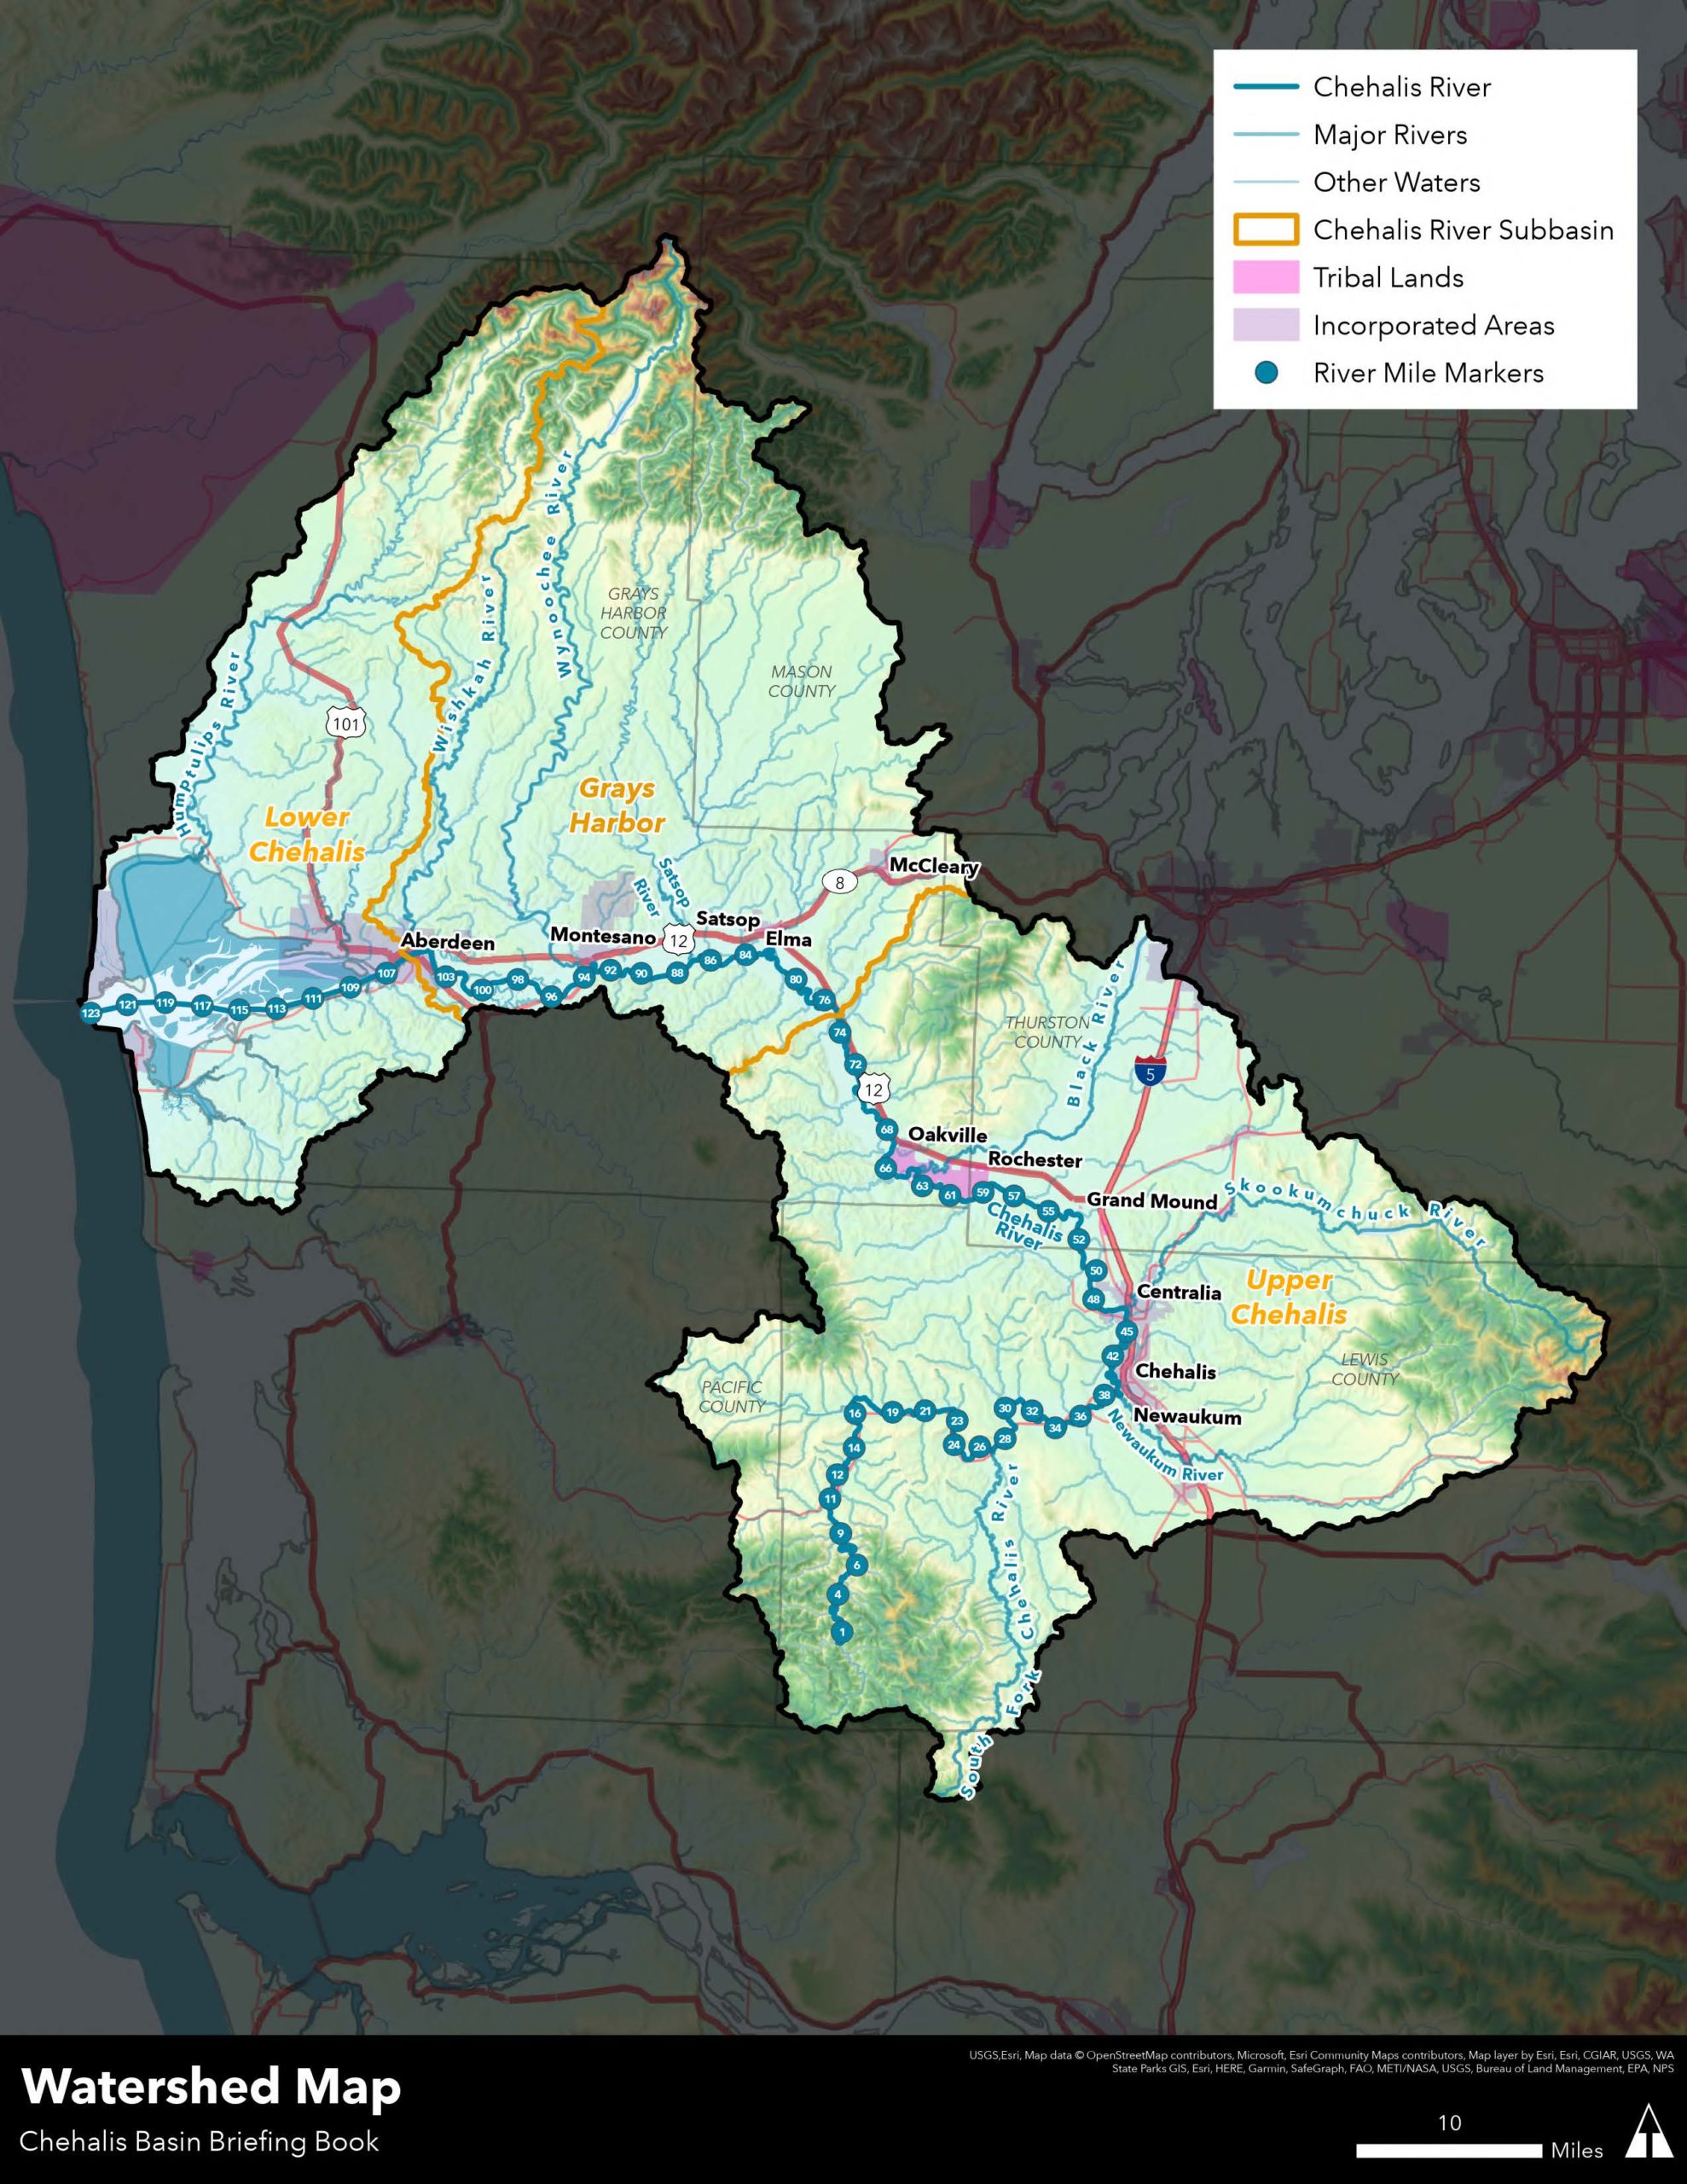 Detail map of the Chehalis watershed from headwaters in the Willapa Hills above Pe Ell to its mouth in Grays Harbor.